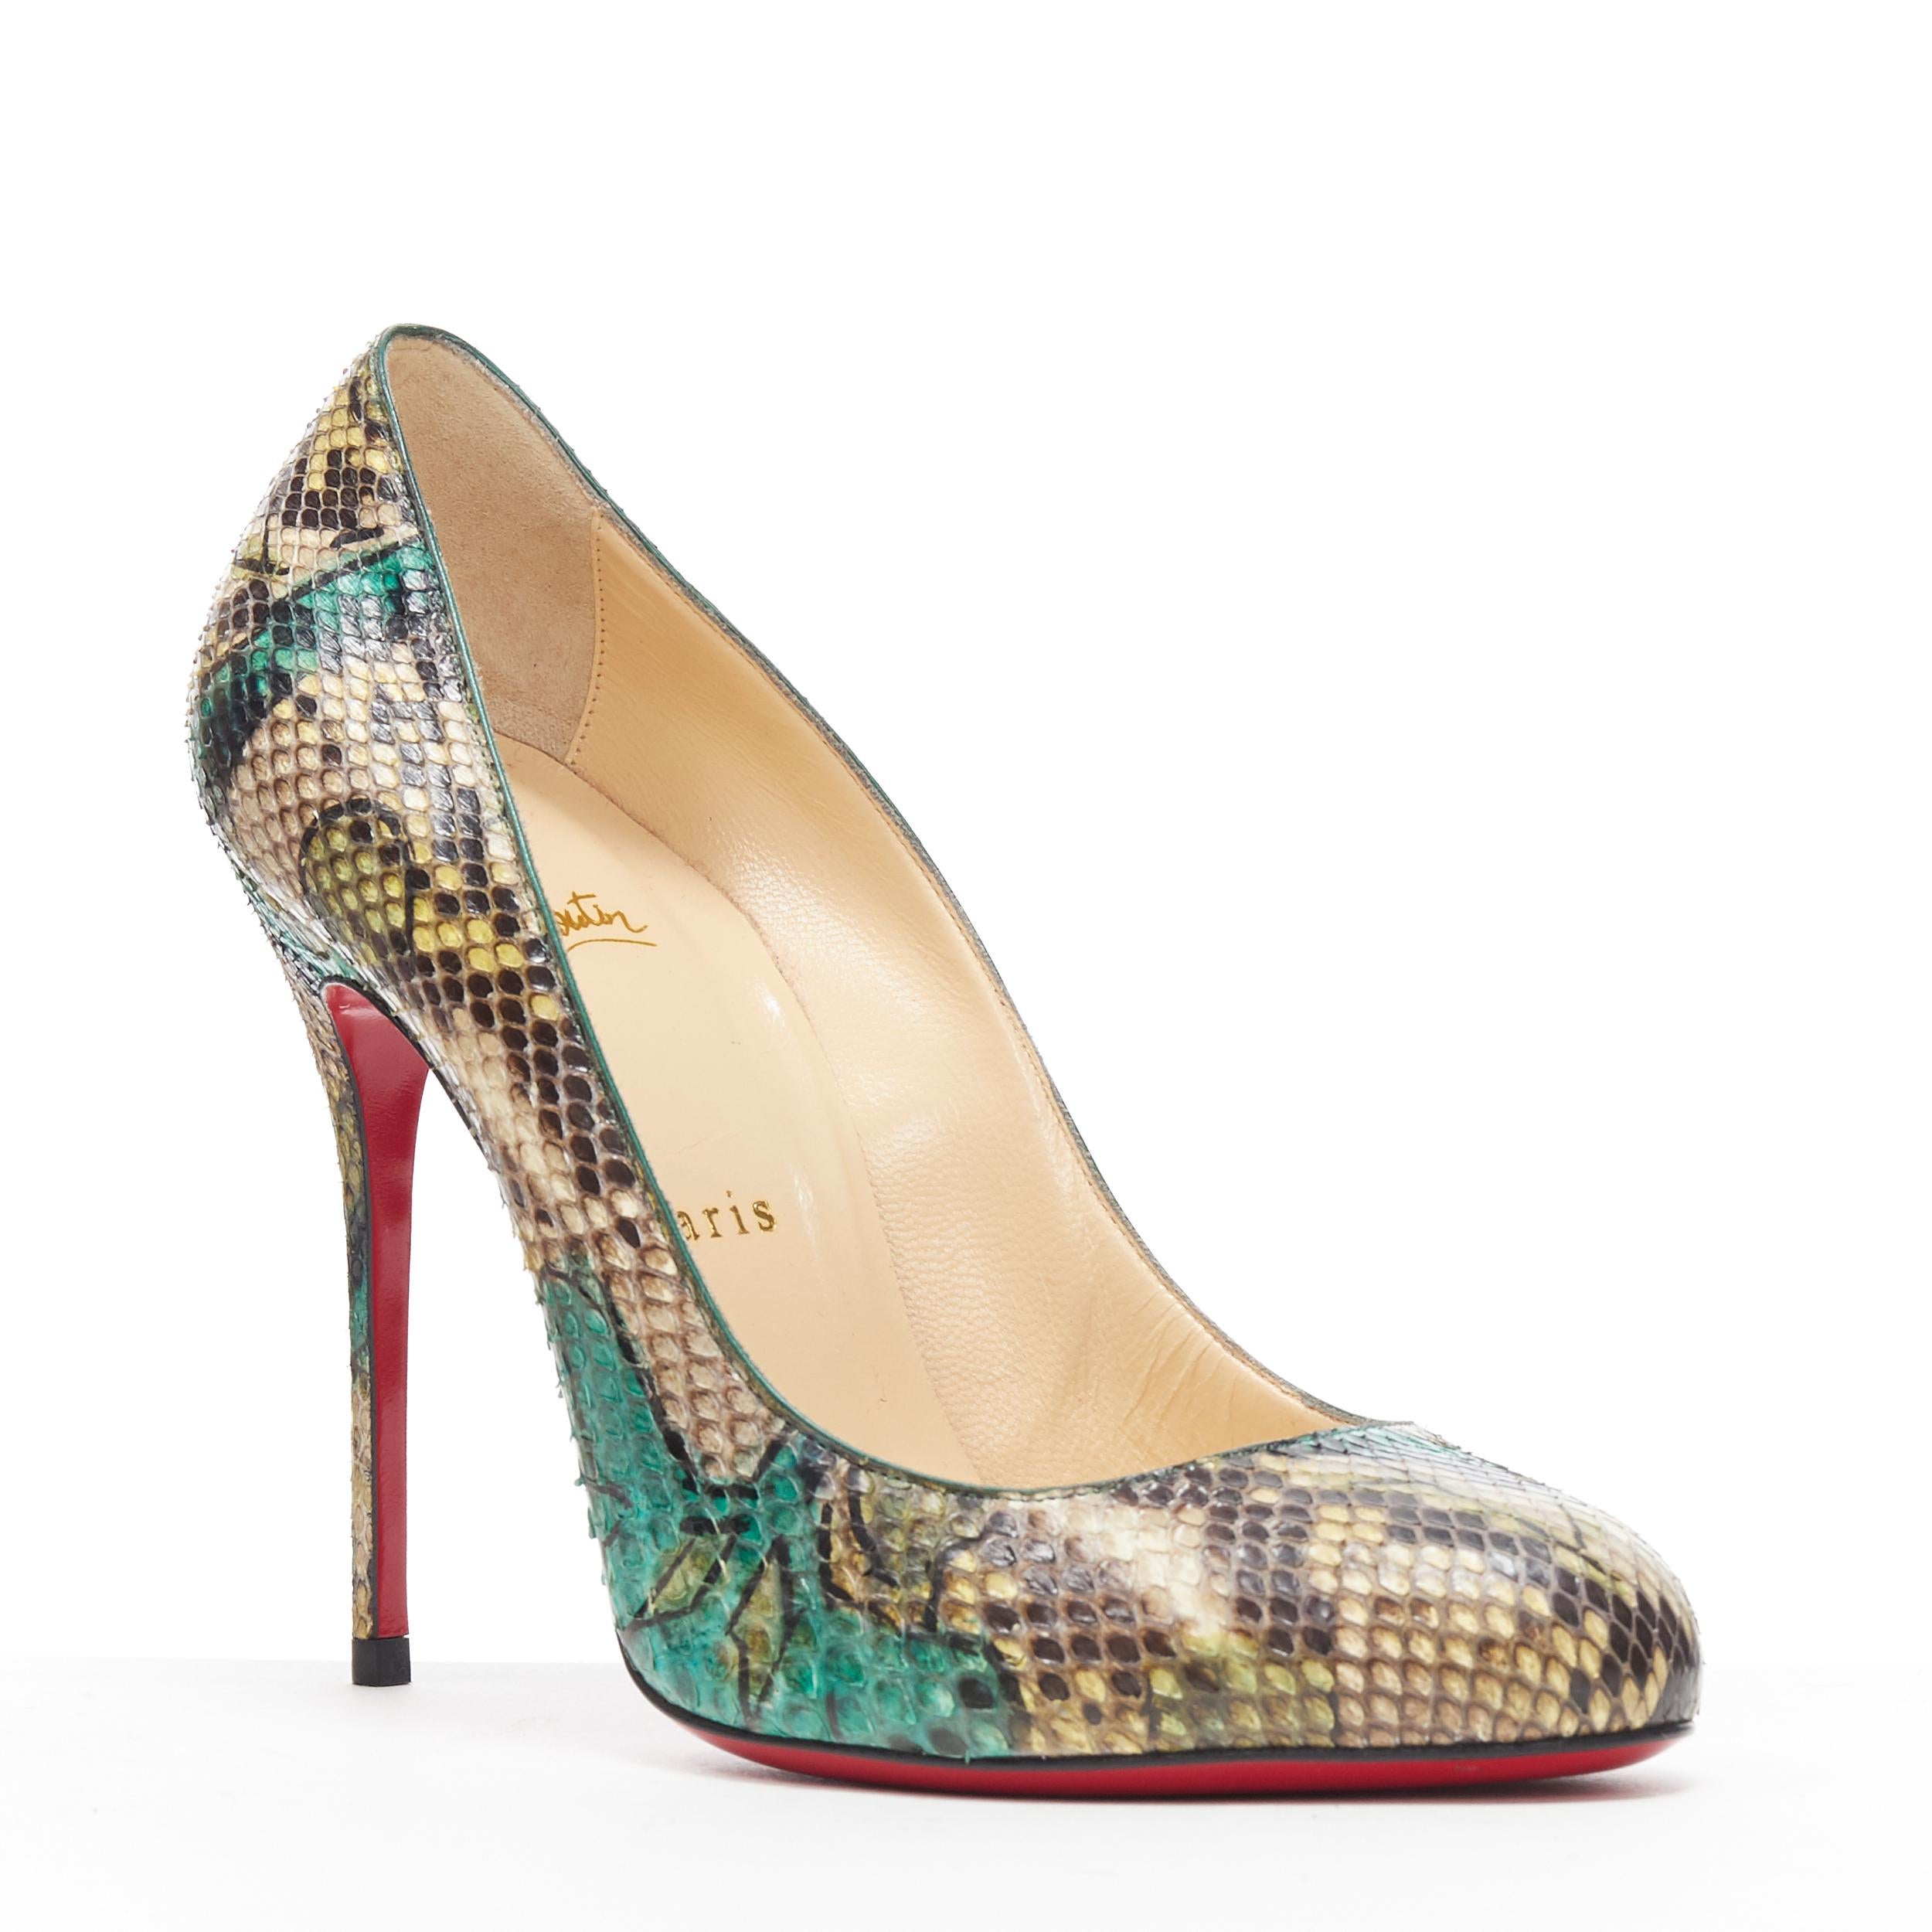 new CHRISTIAN LOUBOUTIN green leaf print scaled leather almond toe pump EU39
Brand: Christian Louboutin
Designer: Christian Louboutin
Model Name / Style: Almond toe pumps
Material: Leather
Color: Green
Pattern: Abstract
Extra Detail: Almond round